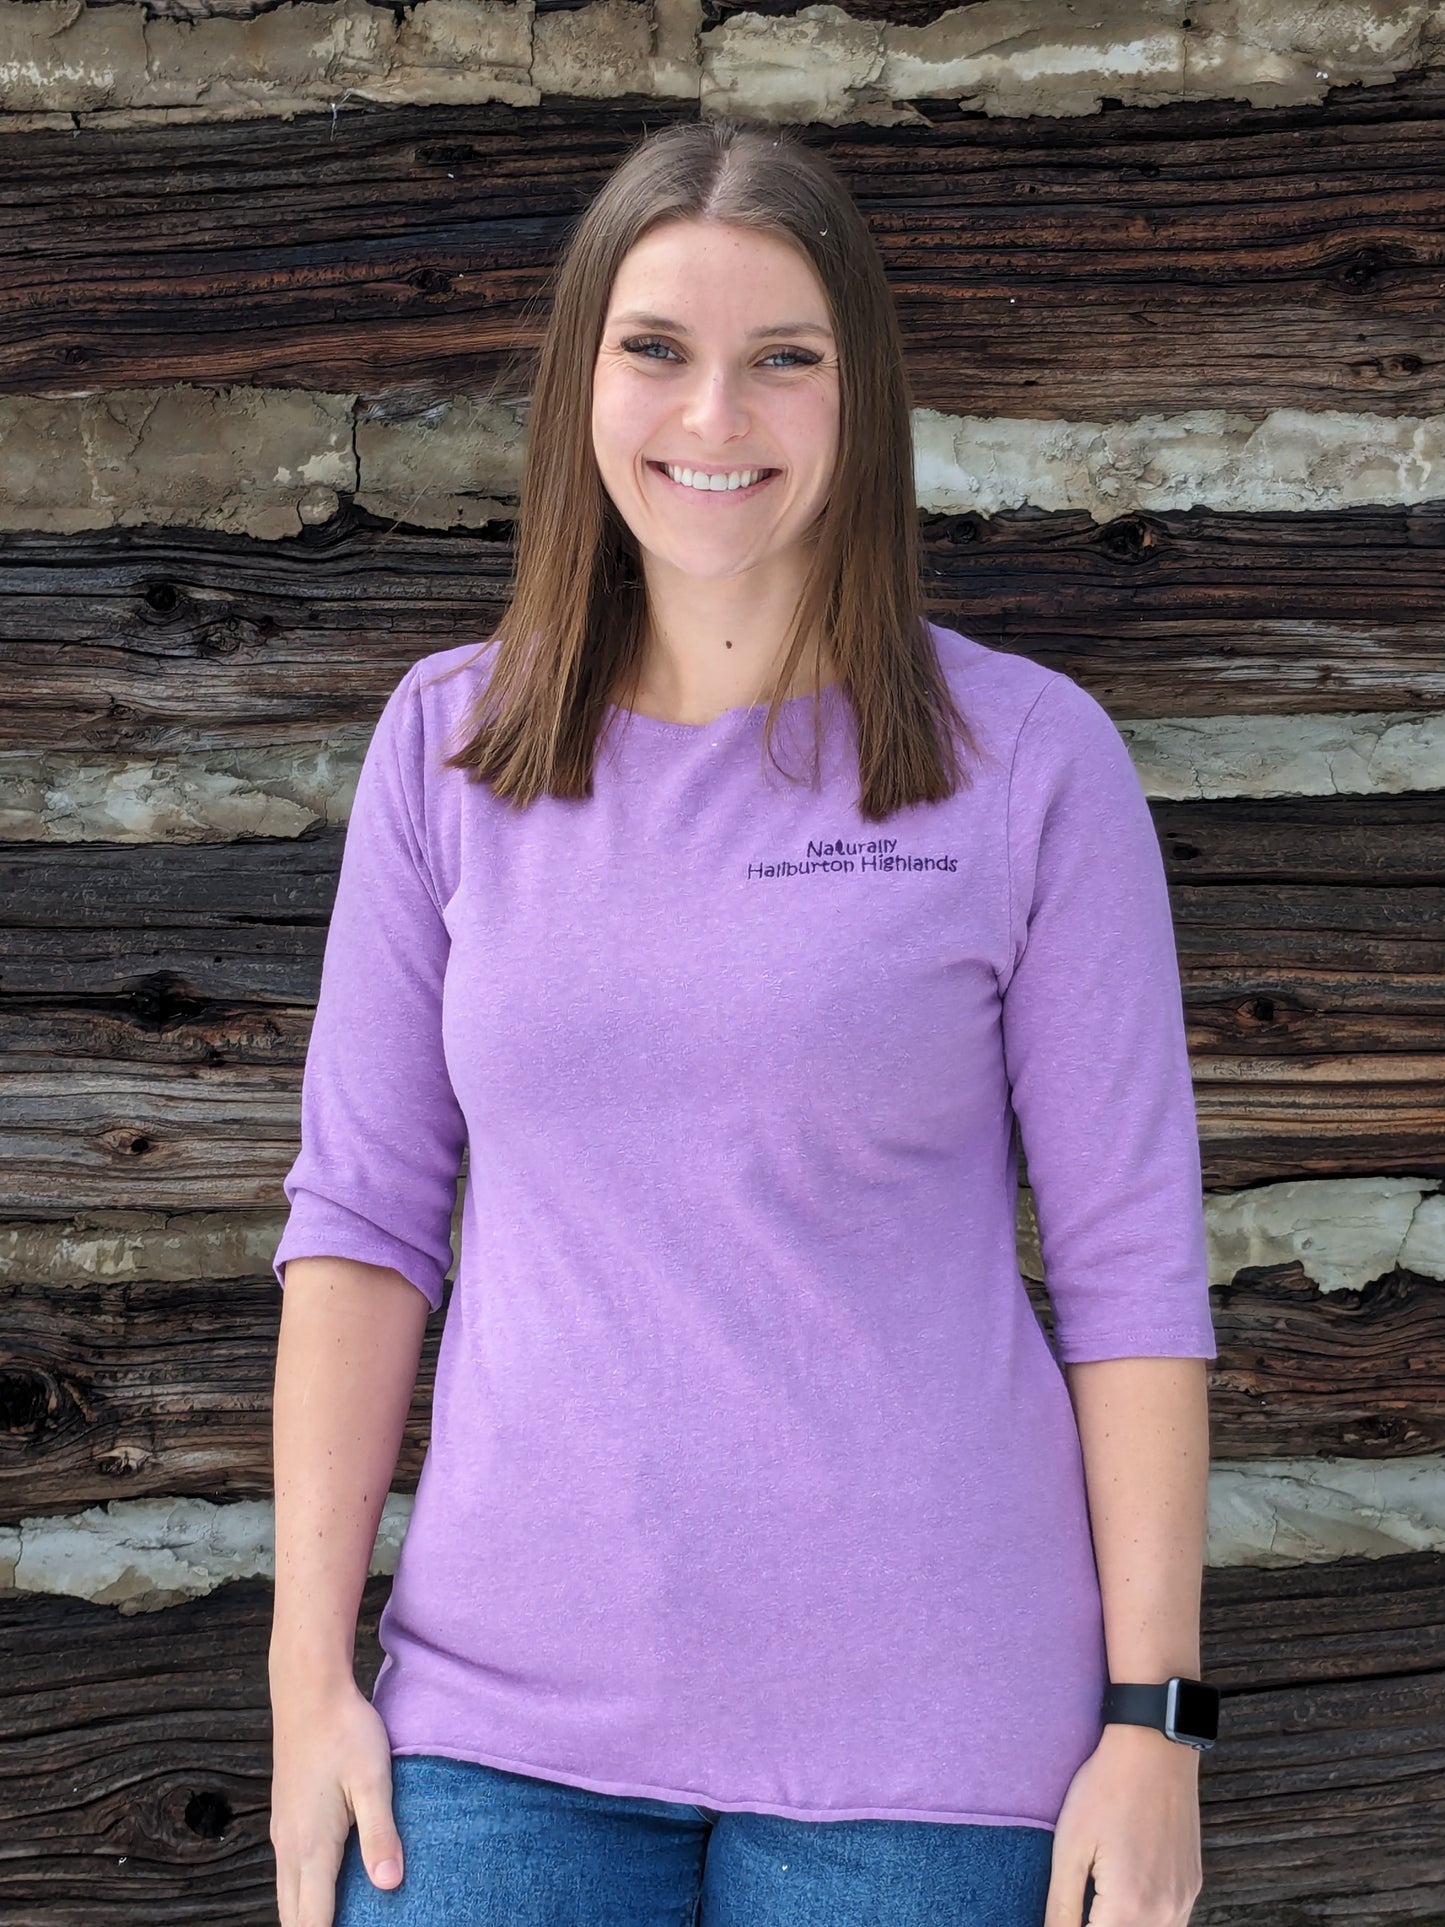 Naturally Haliburton Highlands words embroidered in dark grape purple thread on lilac coloured 3/4 sleeve hemp fluid top worn by our model Morgan